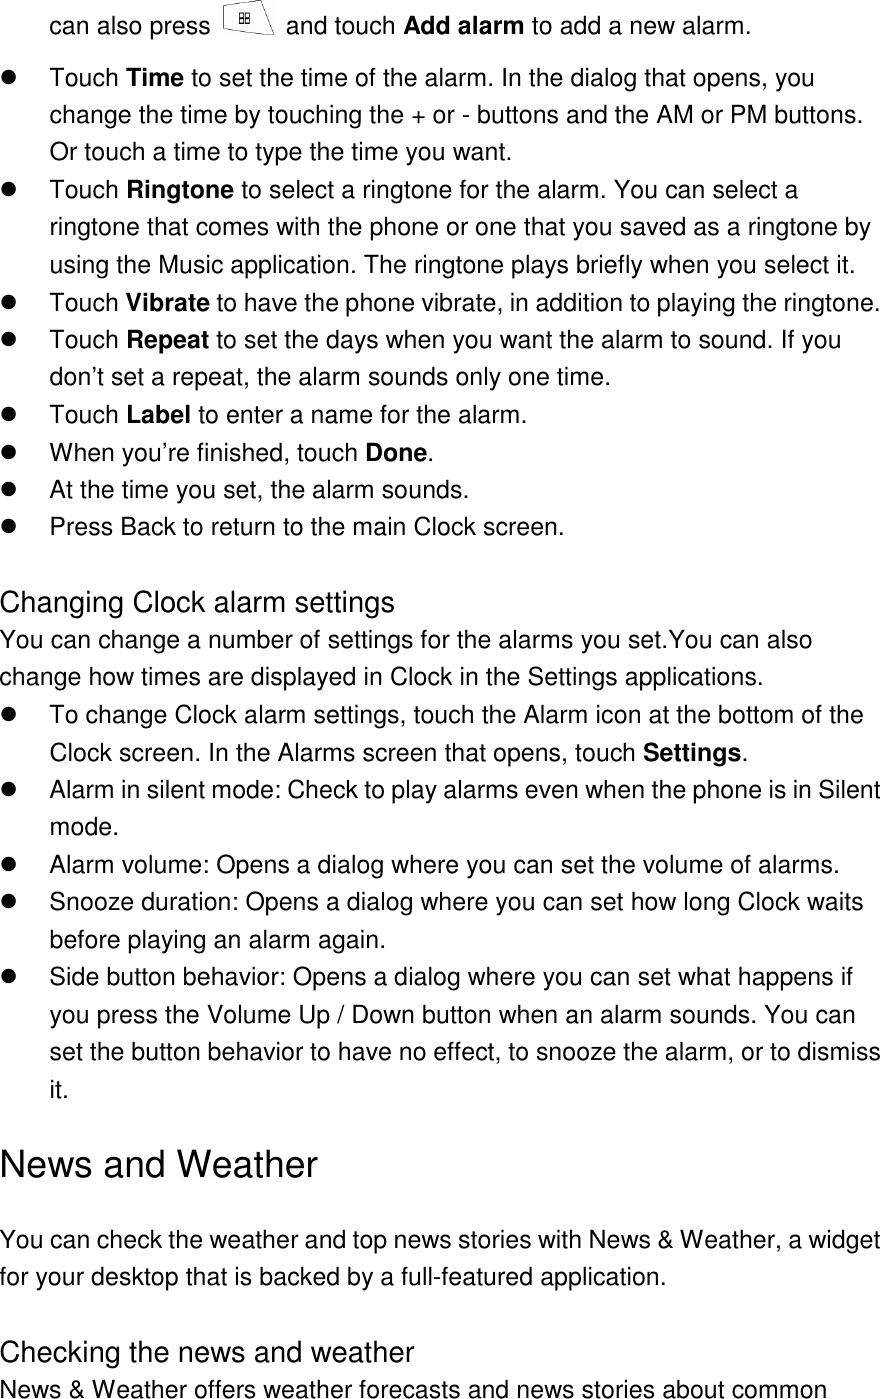 can also press    and touch Add alarm to add a new alarm.   Touch Time to set the time of the alarm. In the dialog that opens, you change the time by touching the + or - buttons and the AM or PM buttons. Or touch a time to type the time you want.   Touch Ringtone to select a ringtone for the alarm. You can select a ringtone that comes with the phone or one that you saved as a ringtone by using the Music application. The ringtone plays briefly when you select it.     Touch Vibrate to have the phone vibrate, in addition to playing the ringtone.     Touch Repeat to set the days when you want the alarm to sound. If you don’t set a repeat, the alarm sounds only one time.   Touch Label to enter a name for the alarm.   When you’re finished, touch Done.   At the time you set, the alarm sounds.   Press Back to return to the main Clock screen.  Changing Clock alarm settings You can change a number of settings for the alarms you set.You can also change how times are displayed in Clock in the Settings applications.     To change Clock alarm settings, touch the Alarm icon at the bottom of the Clock screen. In the Alarms screen that opens, touch Settings.   Alarm in silent mode: Check to play alarms even when the phone is in Silent mode.     Alarm volume: Opens a dialog where you can set the volume of alarms.   Snooze duration: Opens a dialog where you can set how long Clock waits before playing an alarm again.     Side button behavior: Opens a dialog where you can set what happens if you press the Volume Up / Down button when an alarm sounds. You can set the button behavior to have no effect, to snooze the alarm, or to dismiss it. News and Weather You can check the weather and top news stories with News &amp; Weather, a widget for your desktop that is backed by a full-featured application.  Checking the news and weather News &amp; Weather offers weather forecasts and news stories about common 